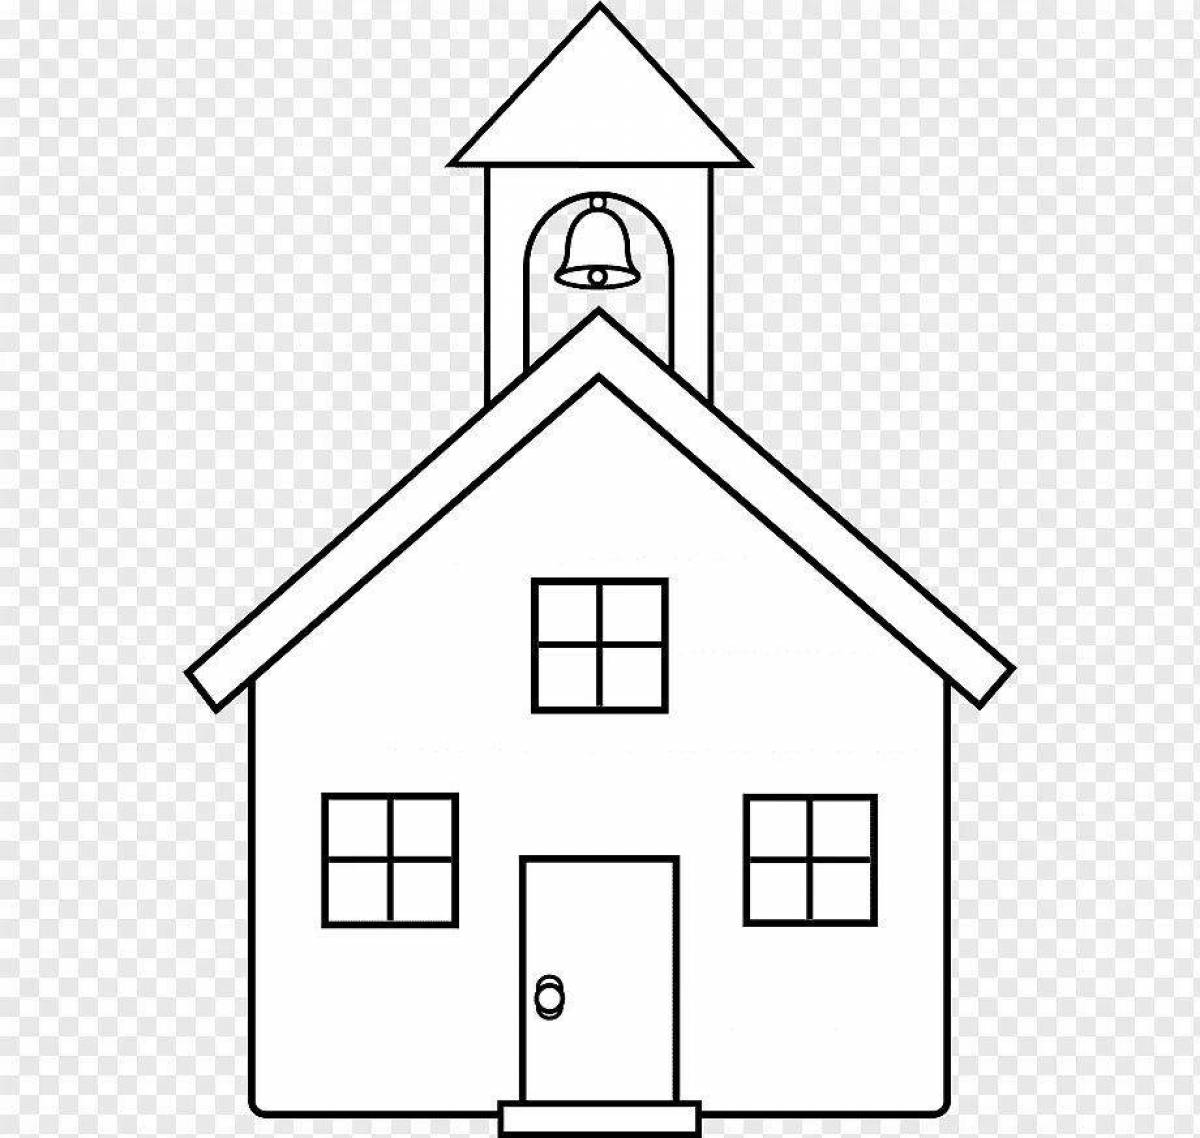 Coloring book cheerful simple house